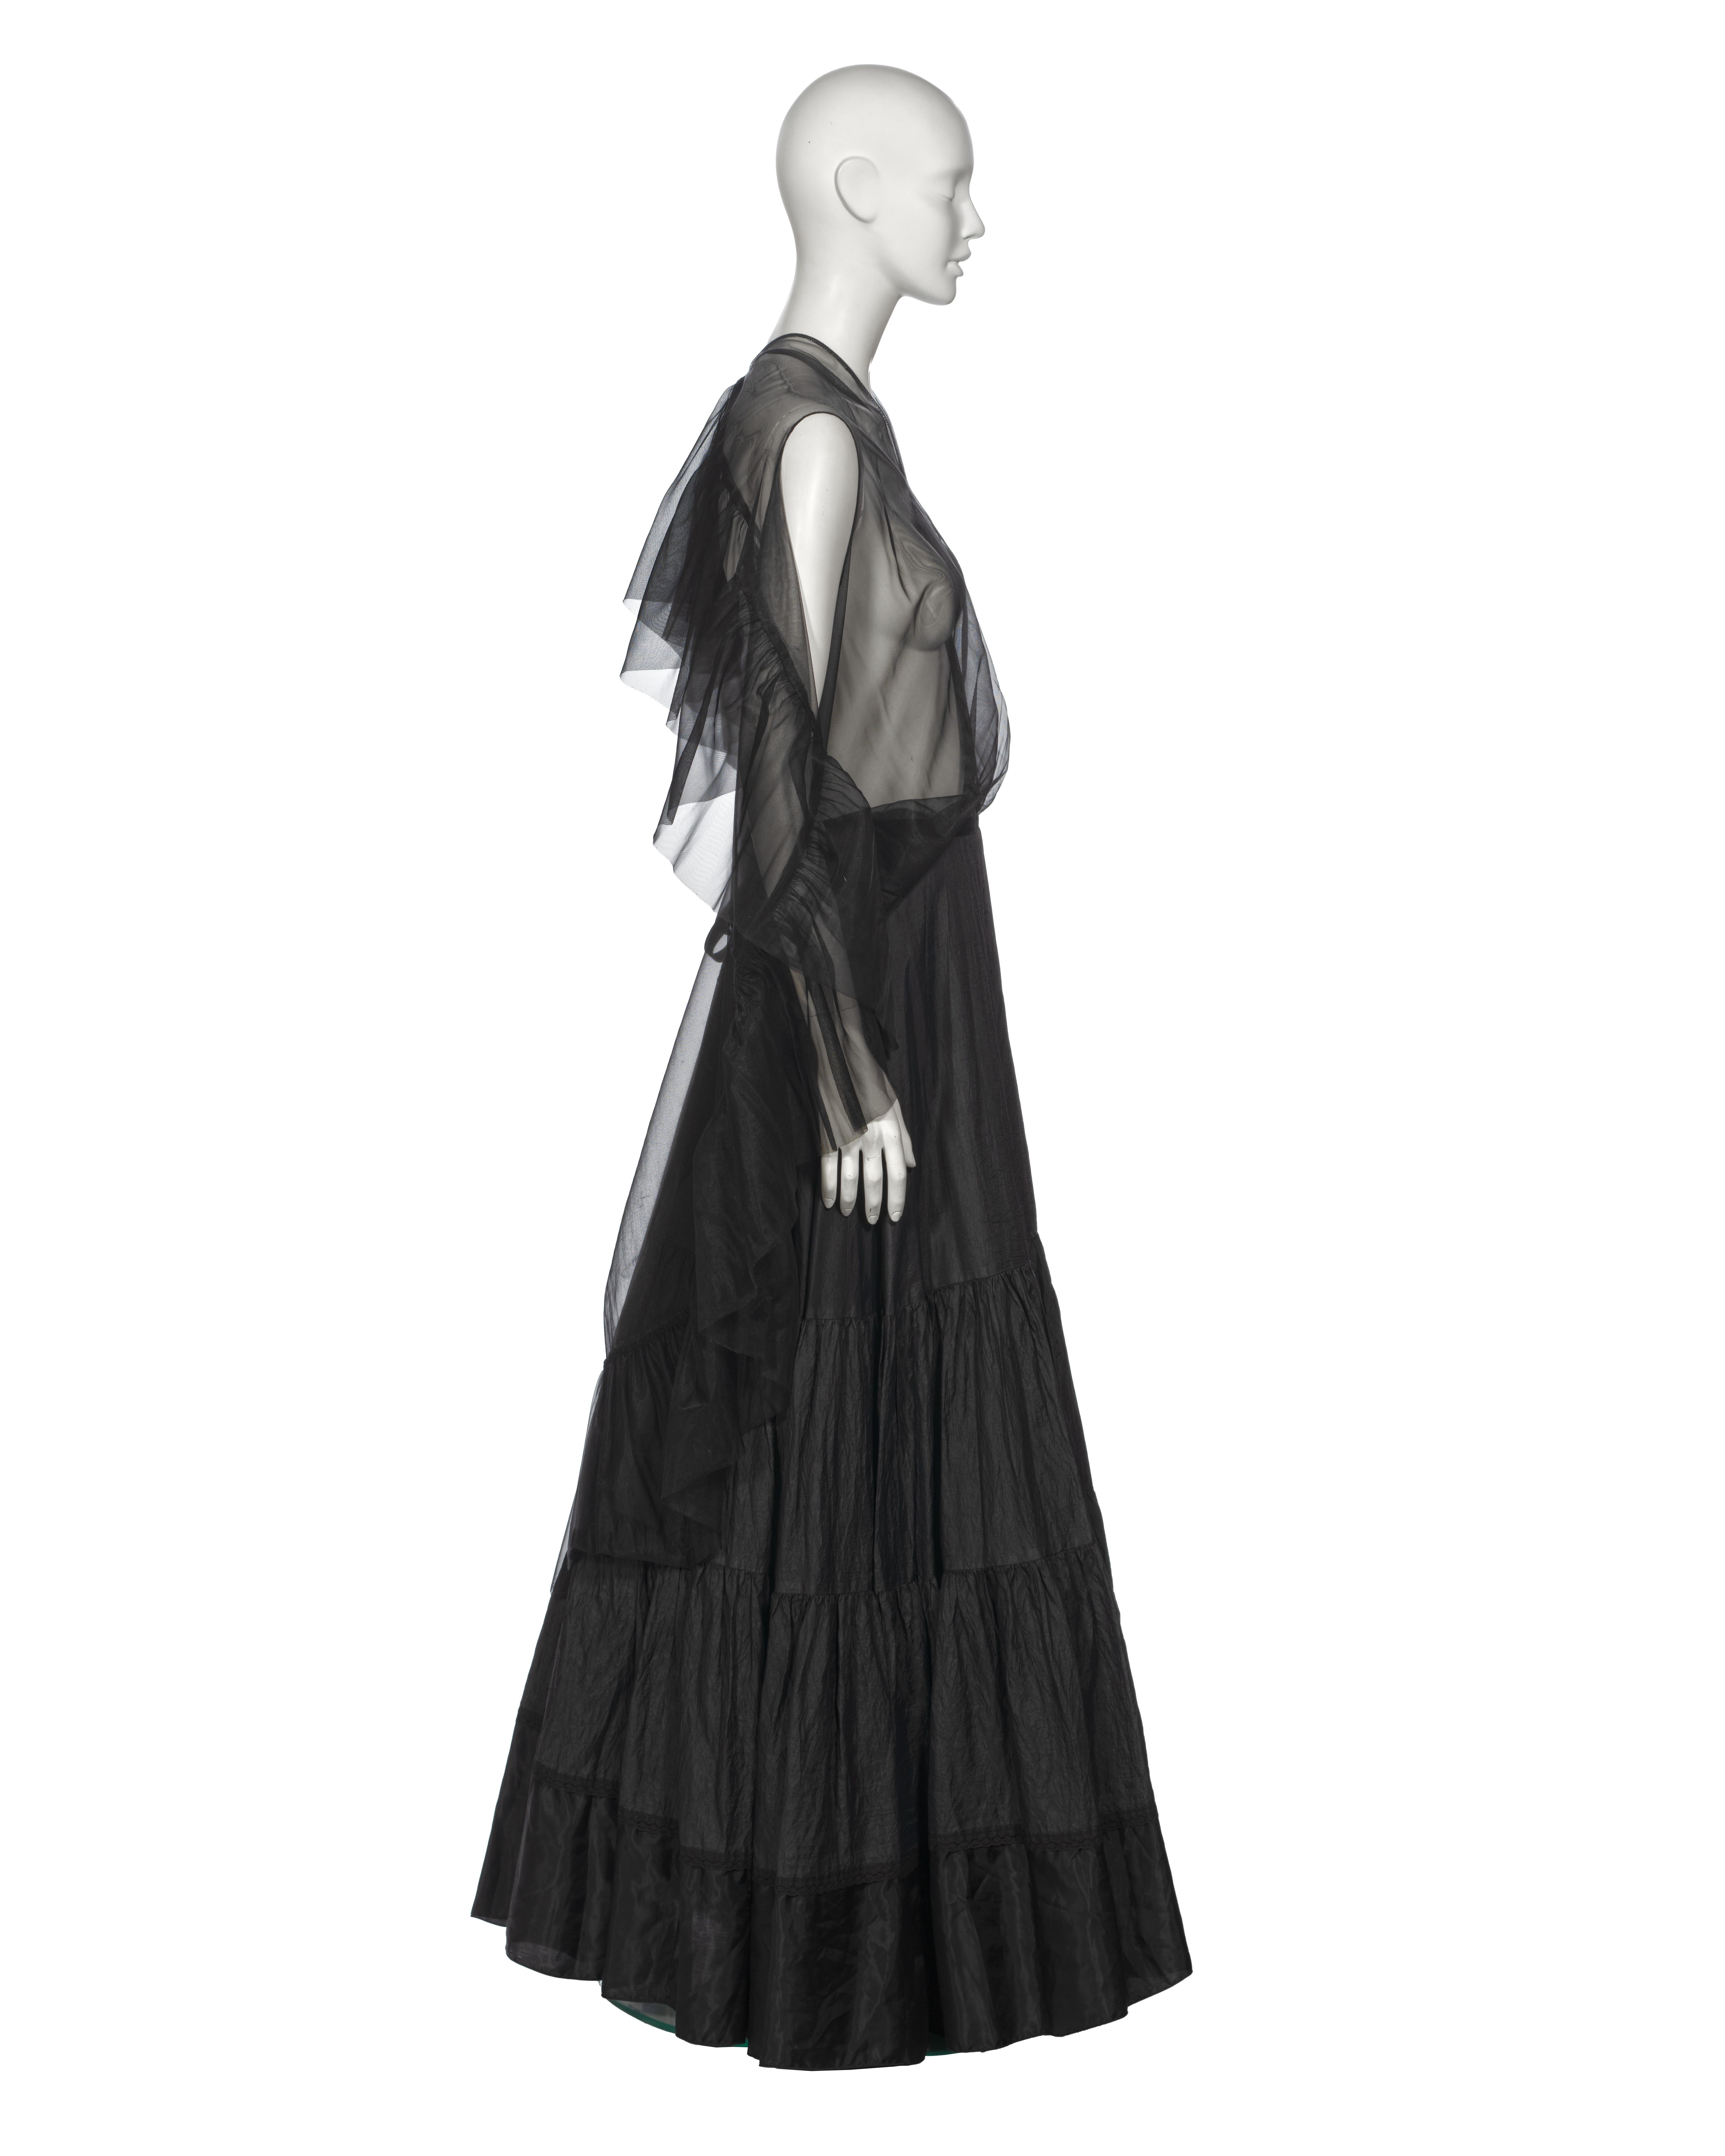 Martin Margiela Artisanal Evening Dress Made Out Of Vintage Petticoats, ss 2003 For Sale 10